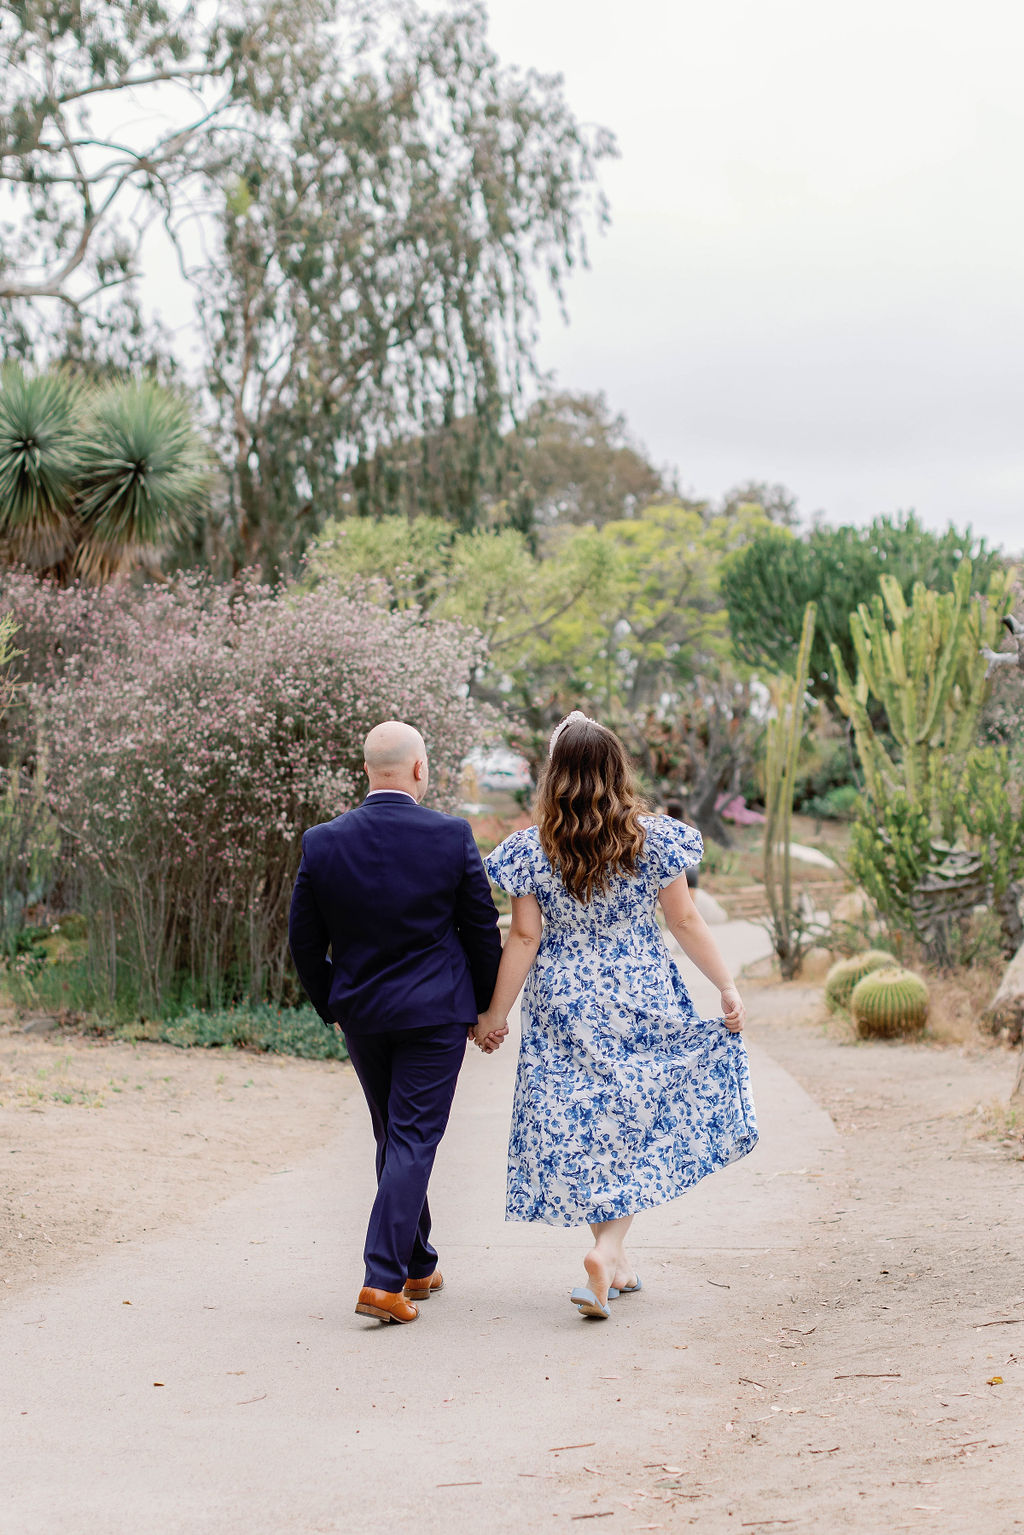 Engagement photo of Jimmy and Hannah  walking hand in hand with their backs to the camera through the gardens of Balboa Park. |Photo by California Photographer Sarah Block Photography